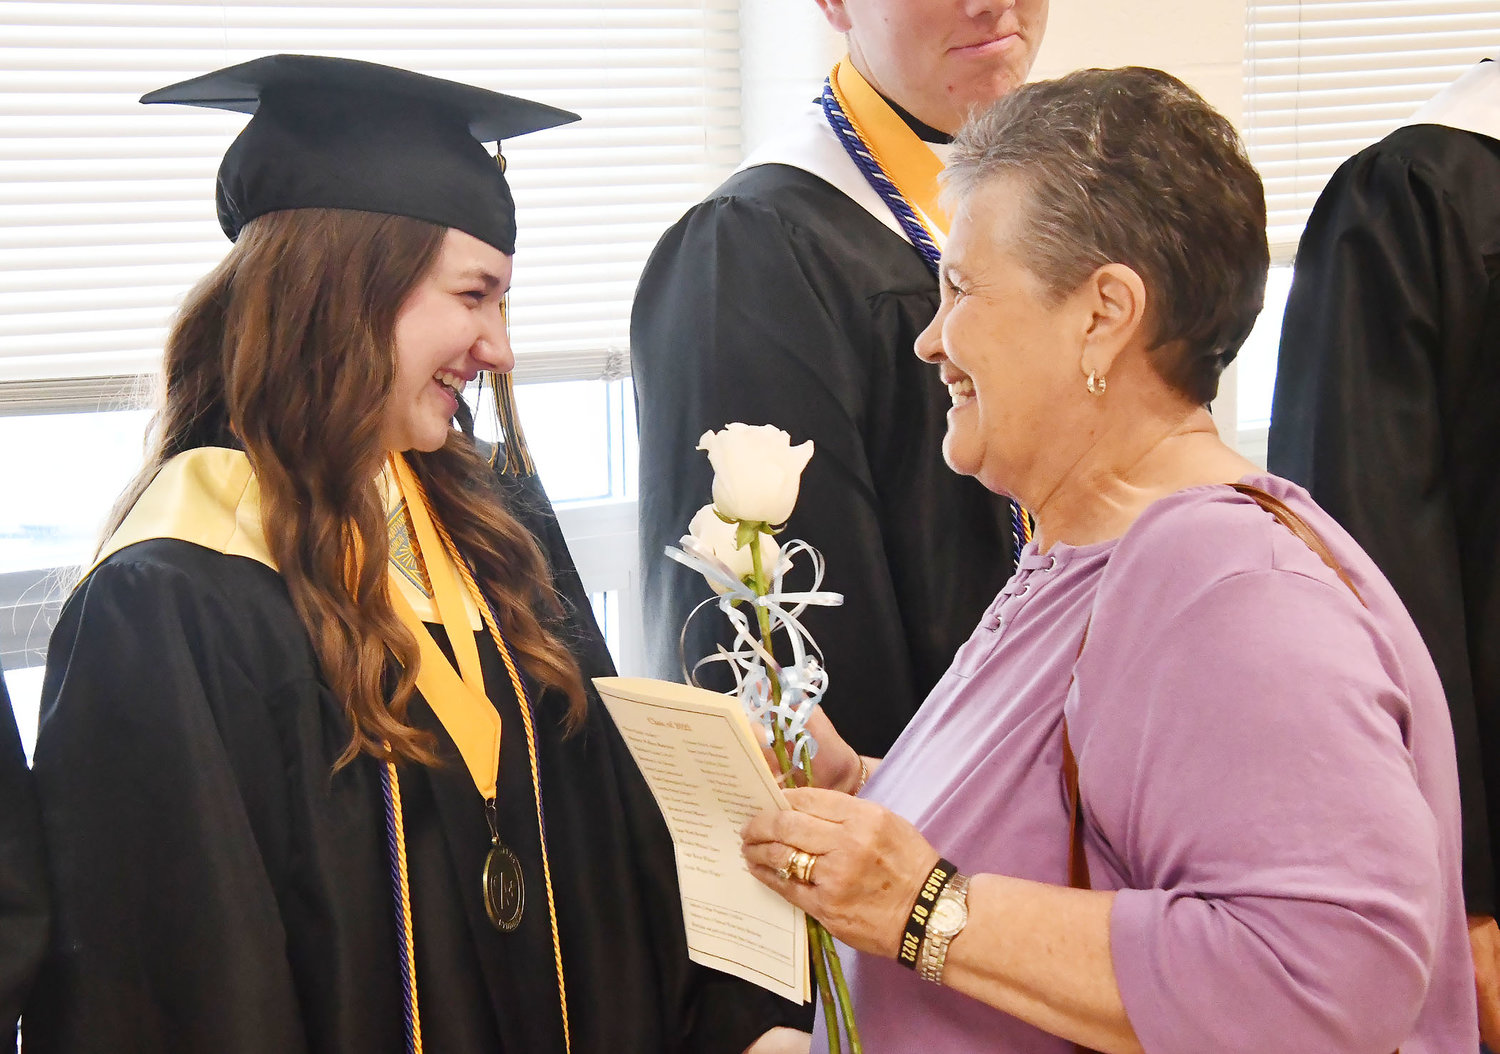 Class of 2022 graduate Lilly Hale smiles during the greeting line after Sunday's commencement exercises.